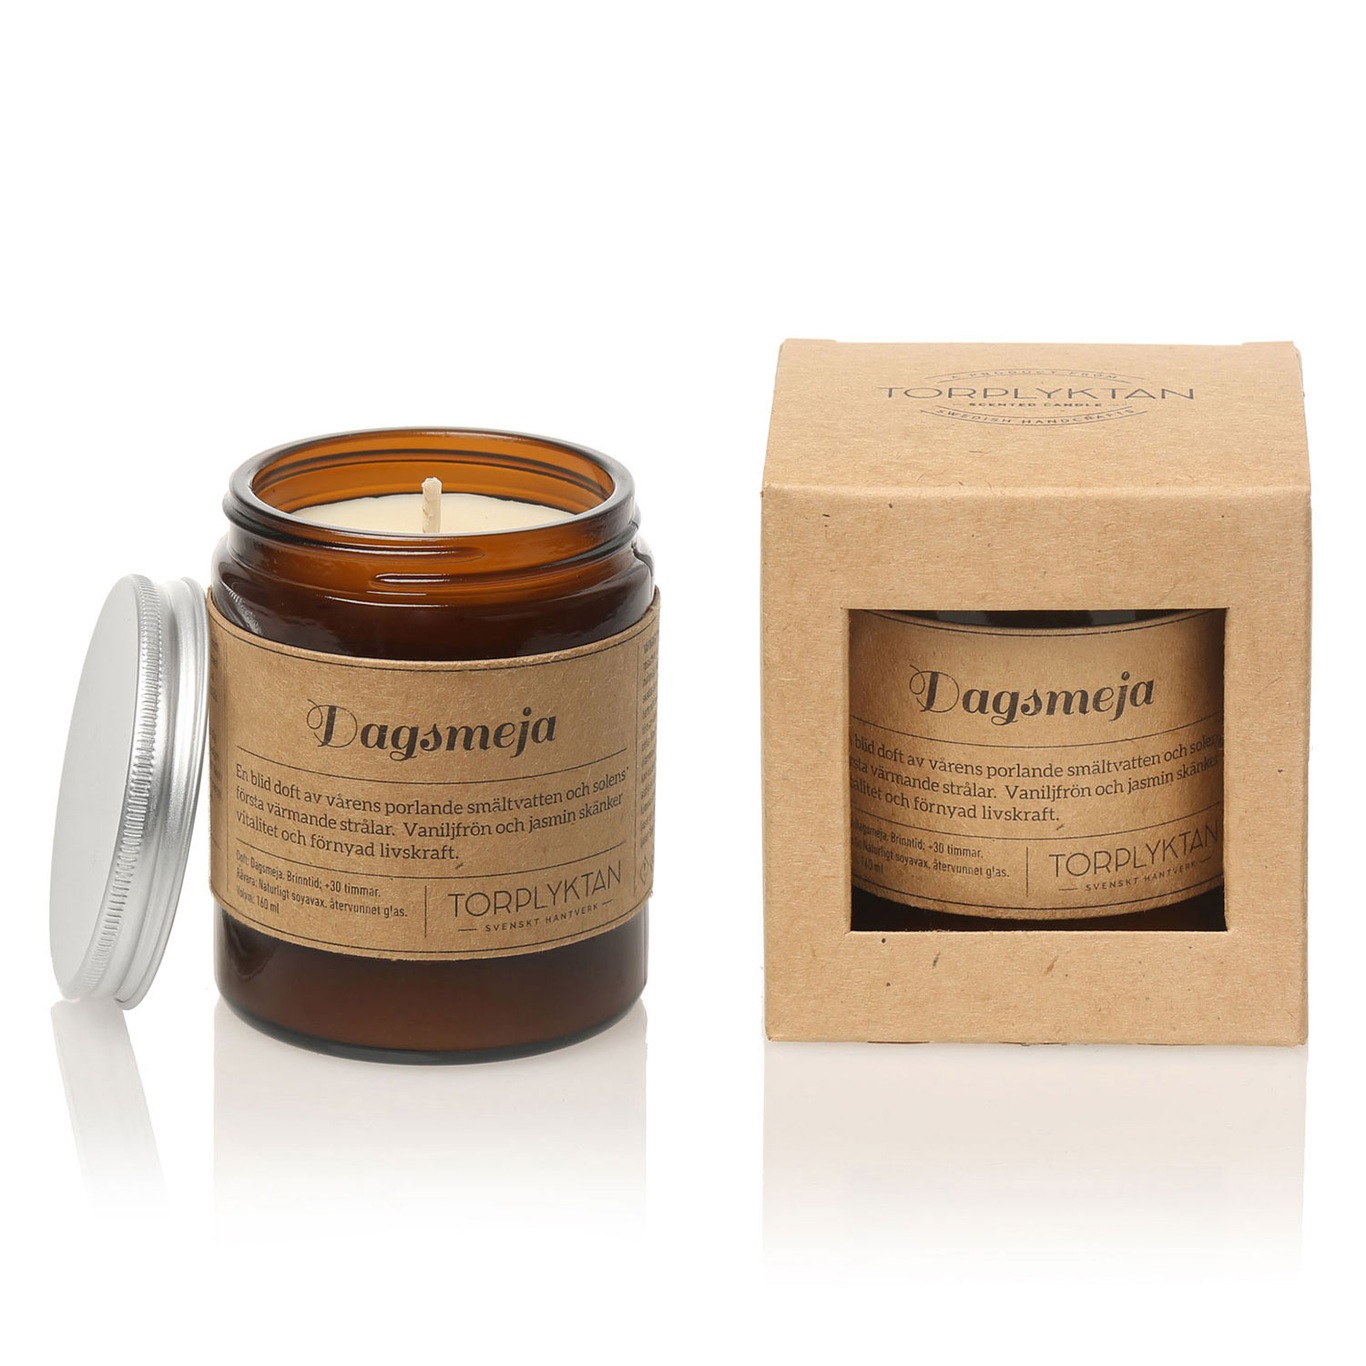 Dagsmeja Scented Candle